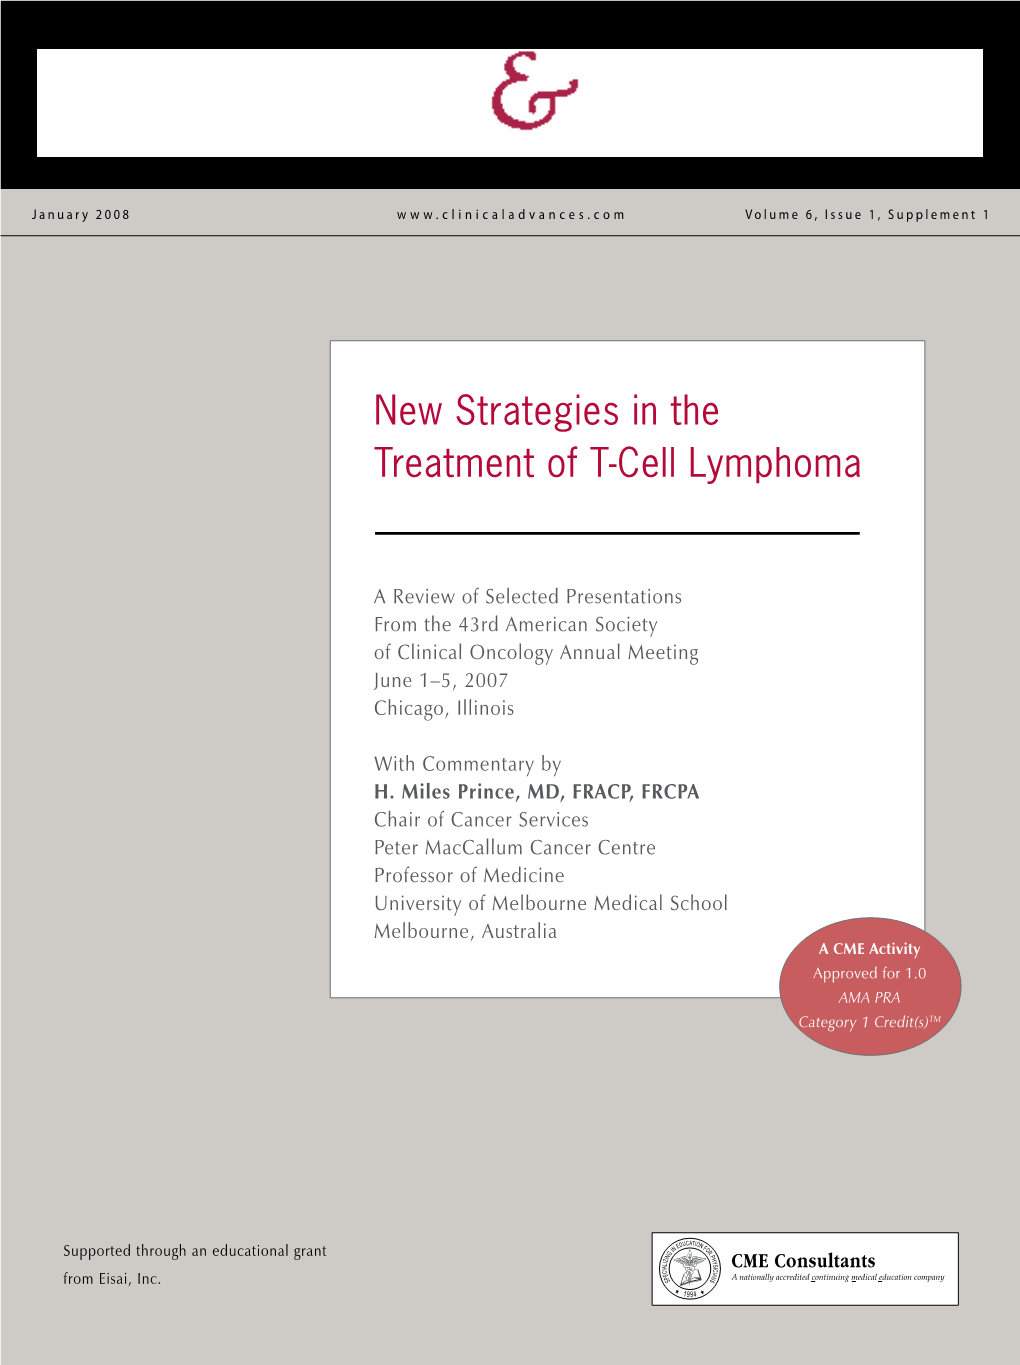 New Strategies in the Treatment of T-Cell Lymphoma